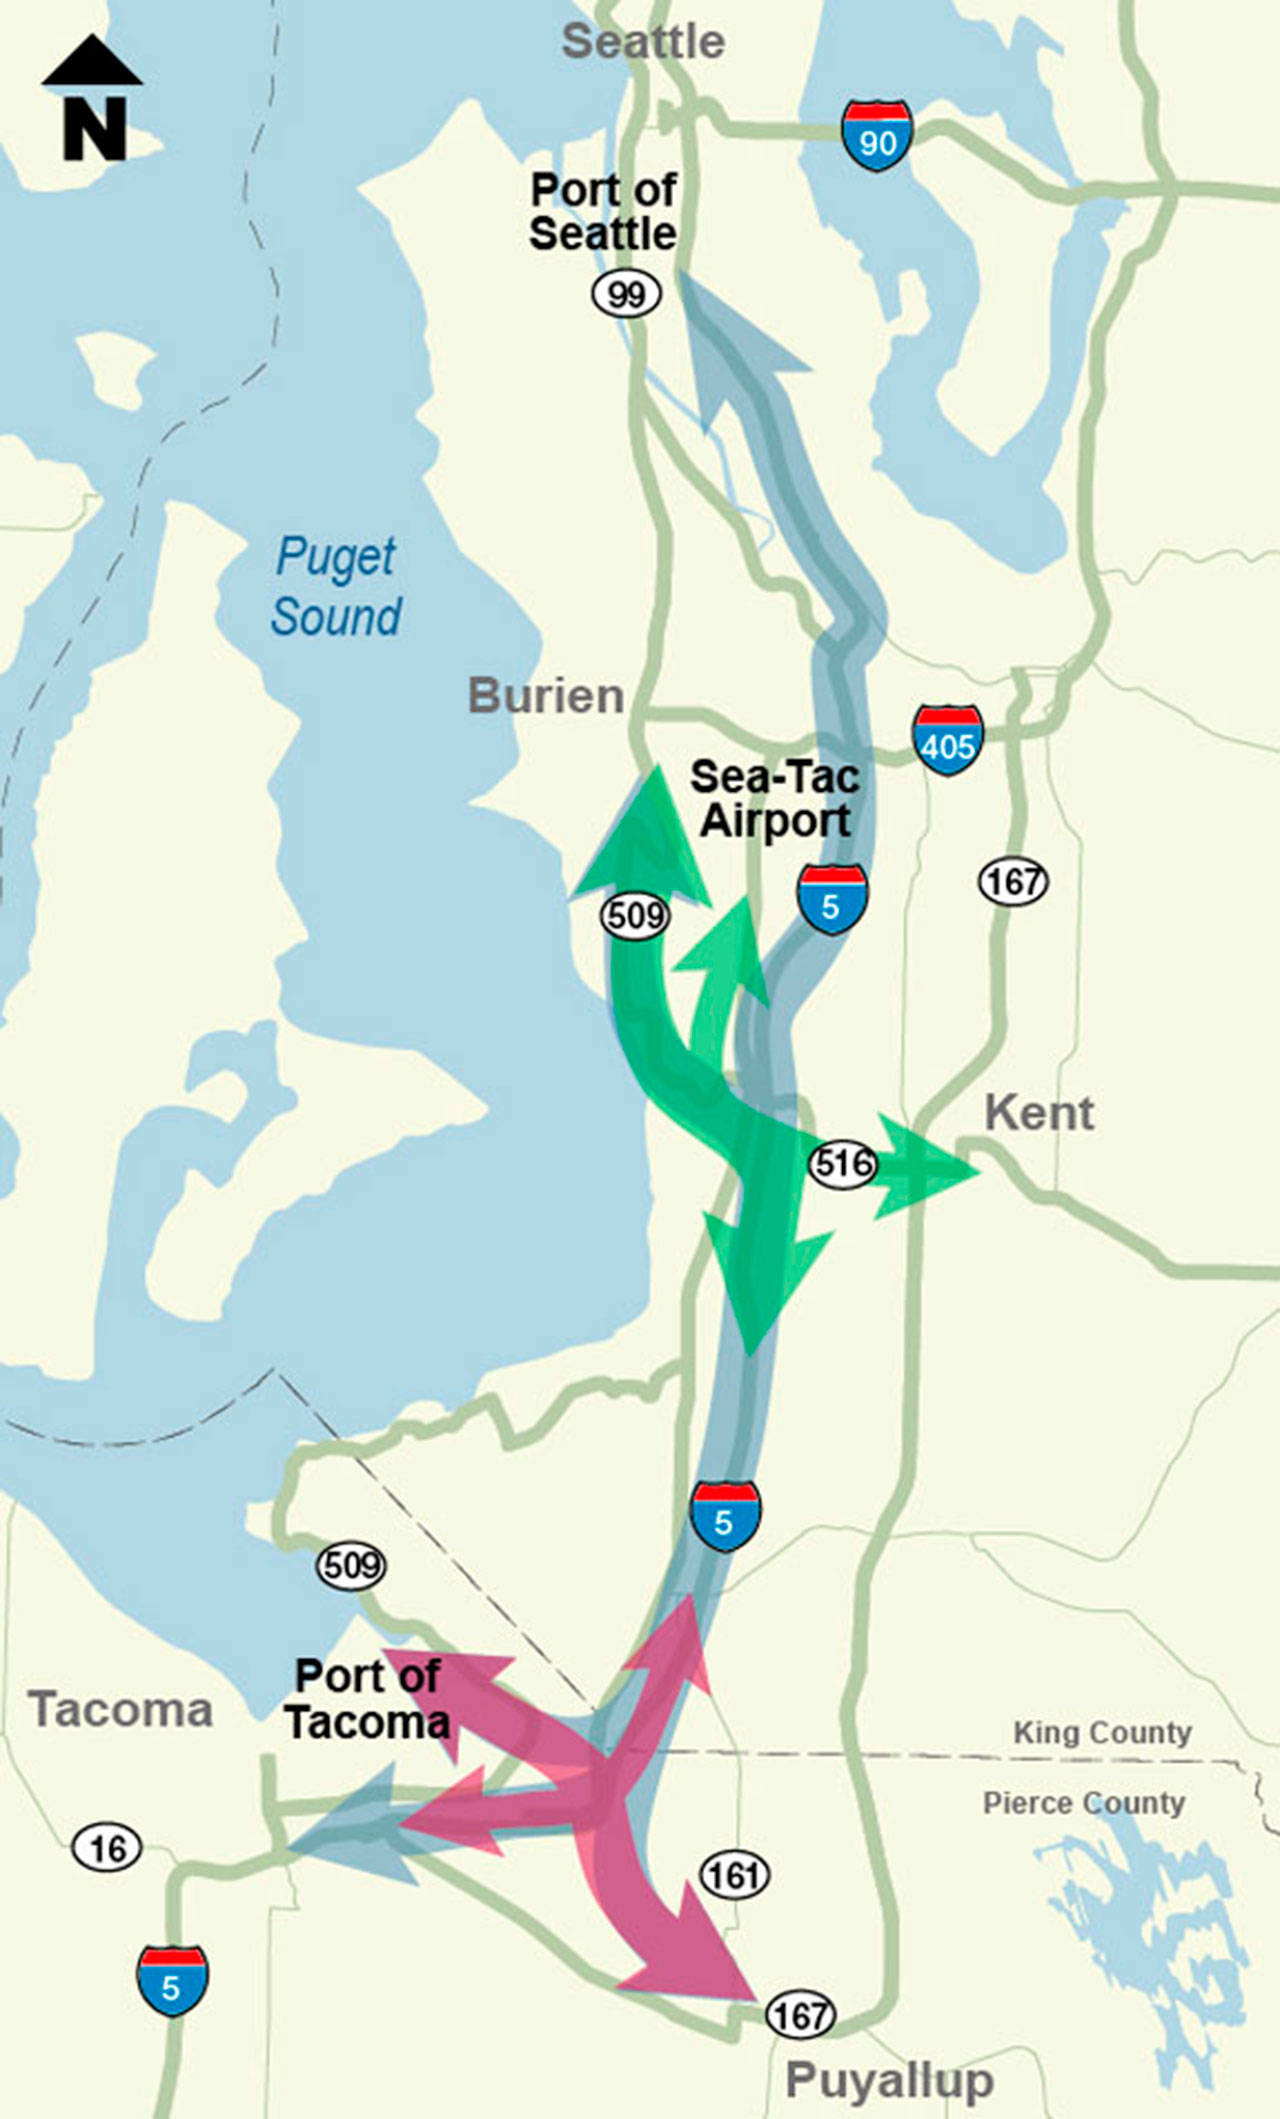 The State Route 167 and SR 509 extensions will complete the missing highway system links to Interstate 5 that offer commuter and freight mobility benefits through added capacity and improved connectivity. COURTESY MAP, WSDOT